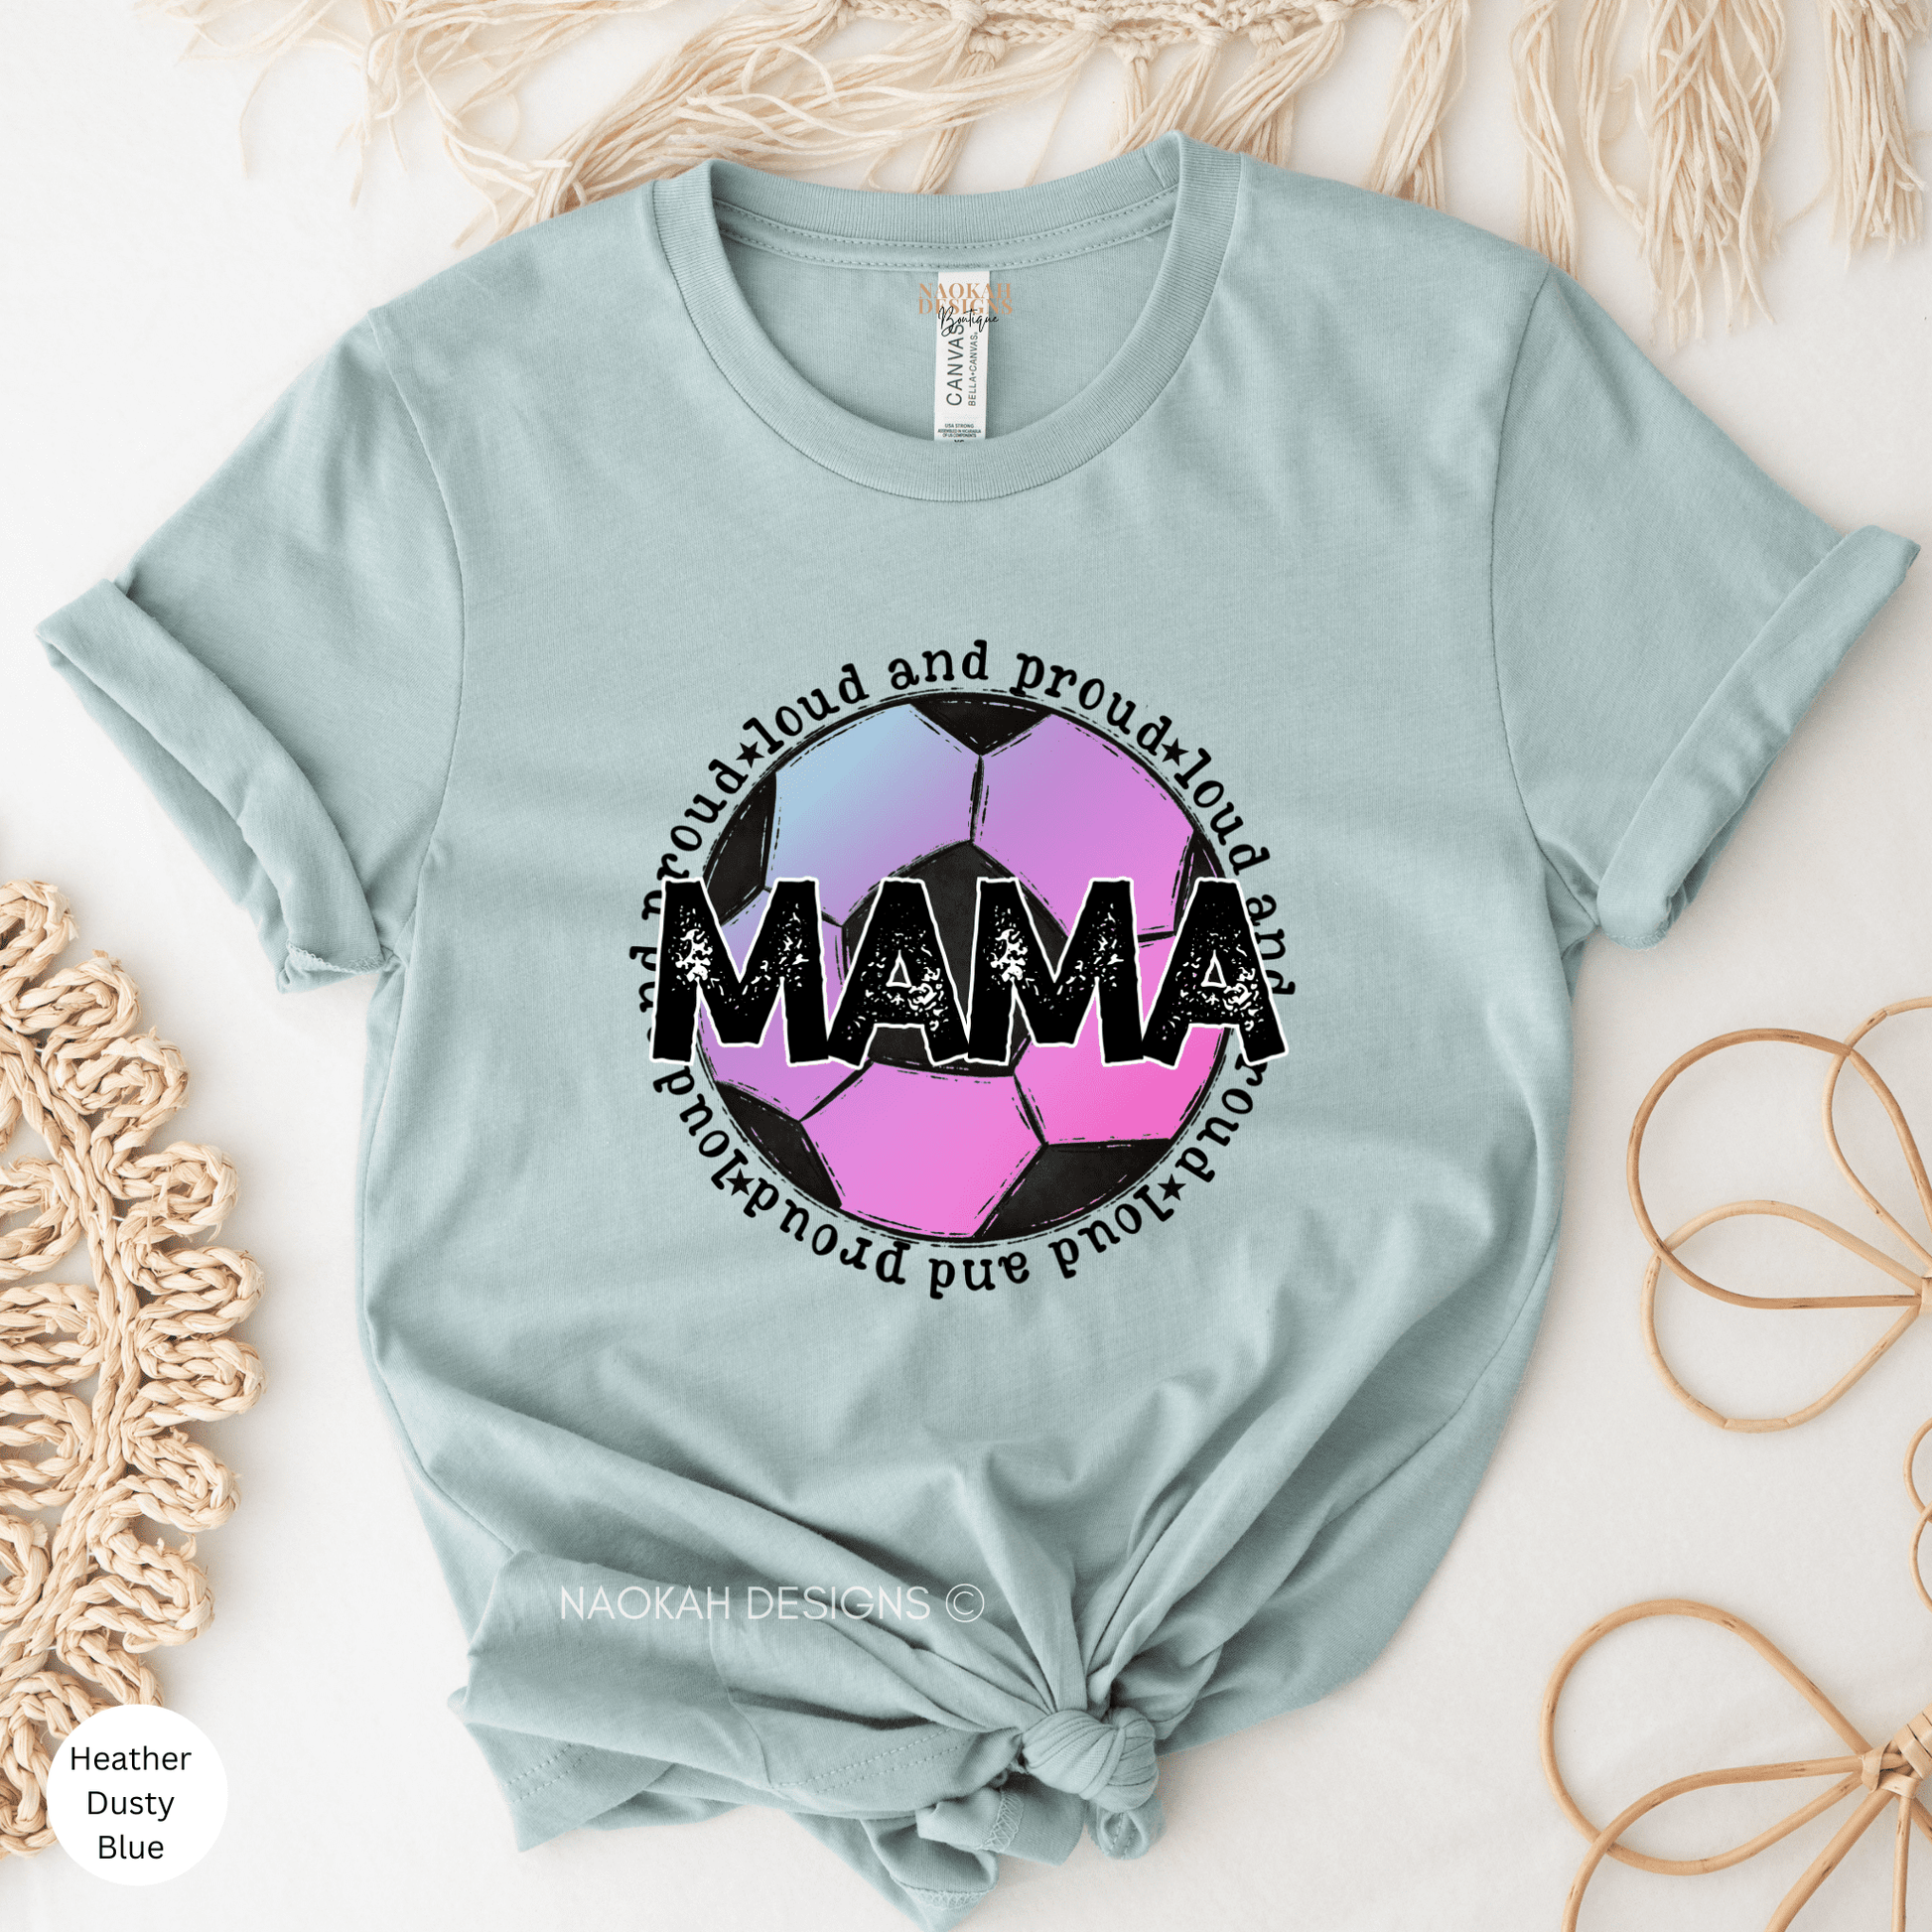 Loud and Proud Soccer Mom Shirt, Soccer Mom Shirt, Soccer Mama Shirt, Kick Some Grass Soccer Shirt, Game Day Shirt, Soccer Coffee Tee